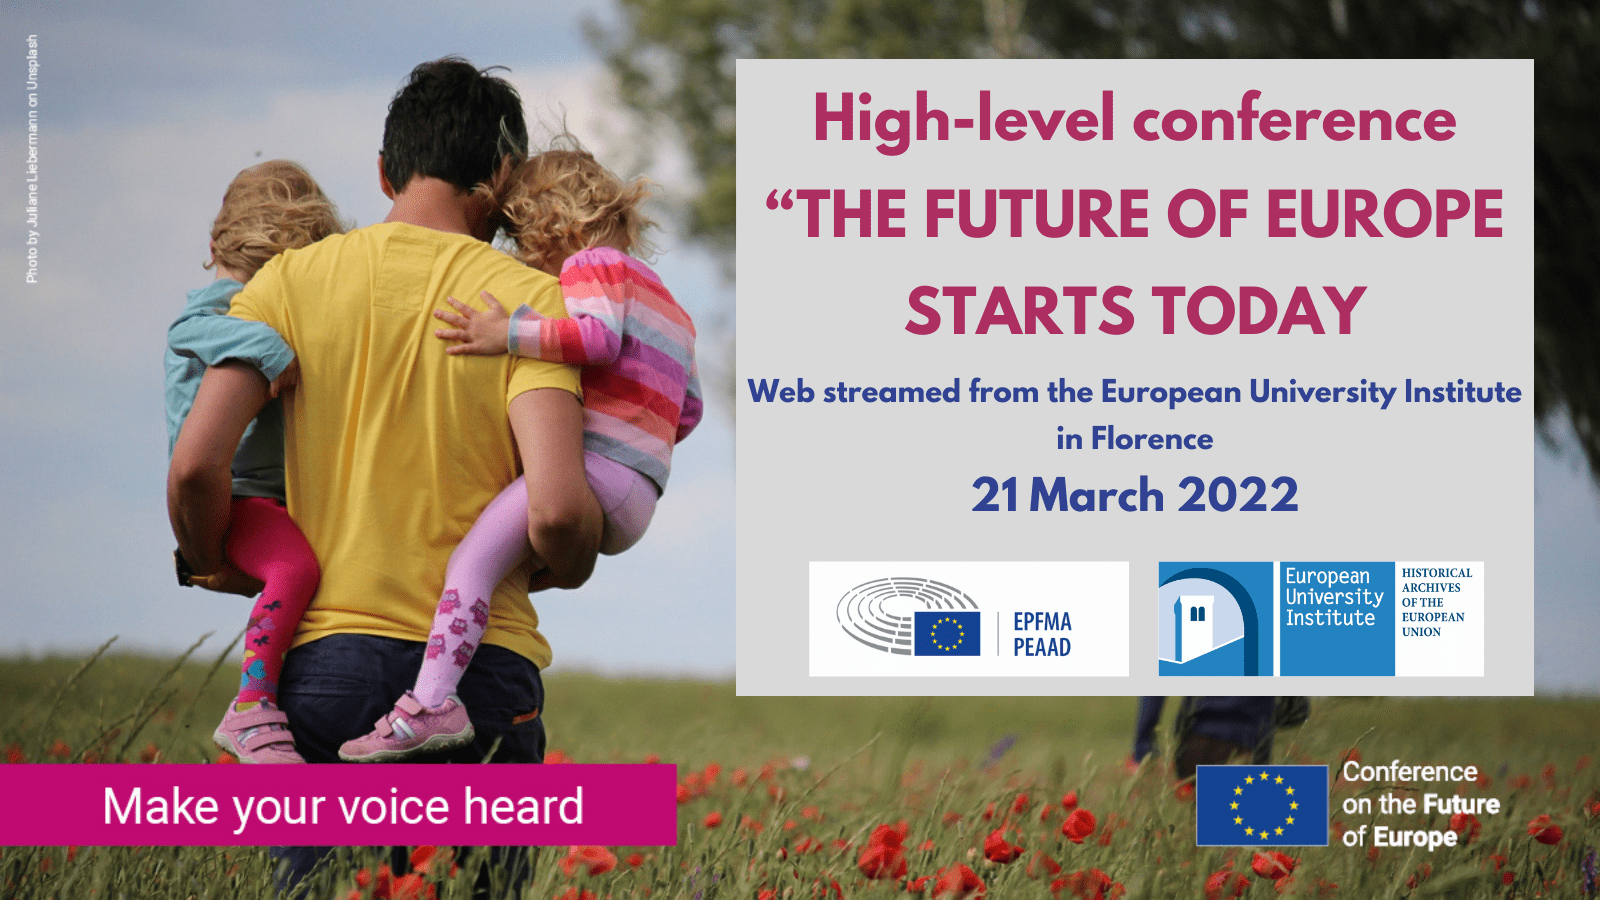 High- level conference “THE FUTURE OF EUROPE STARTS TODAY”